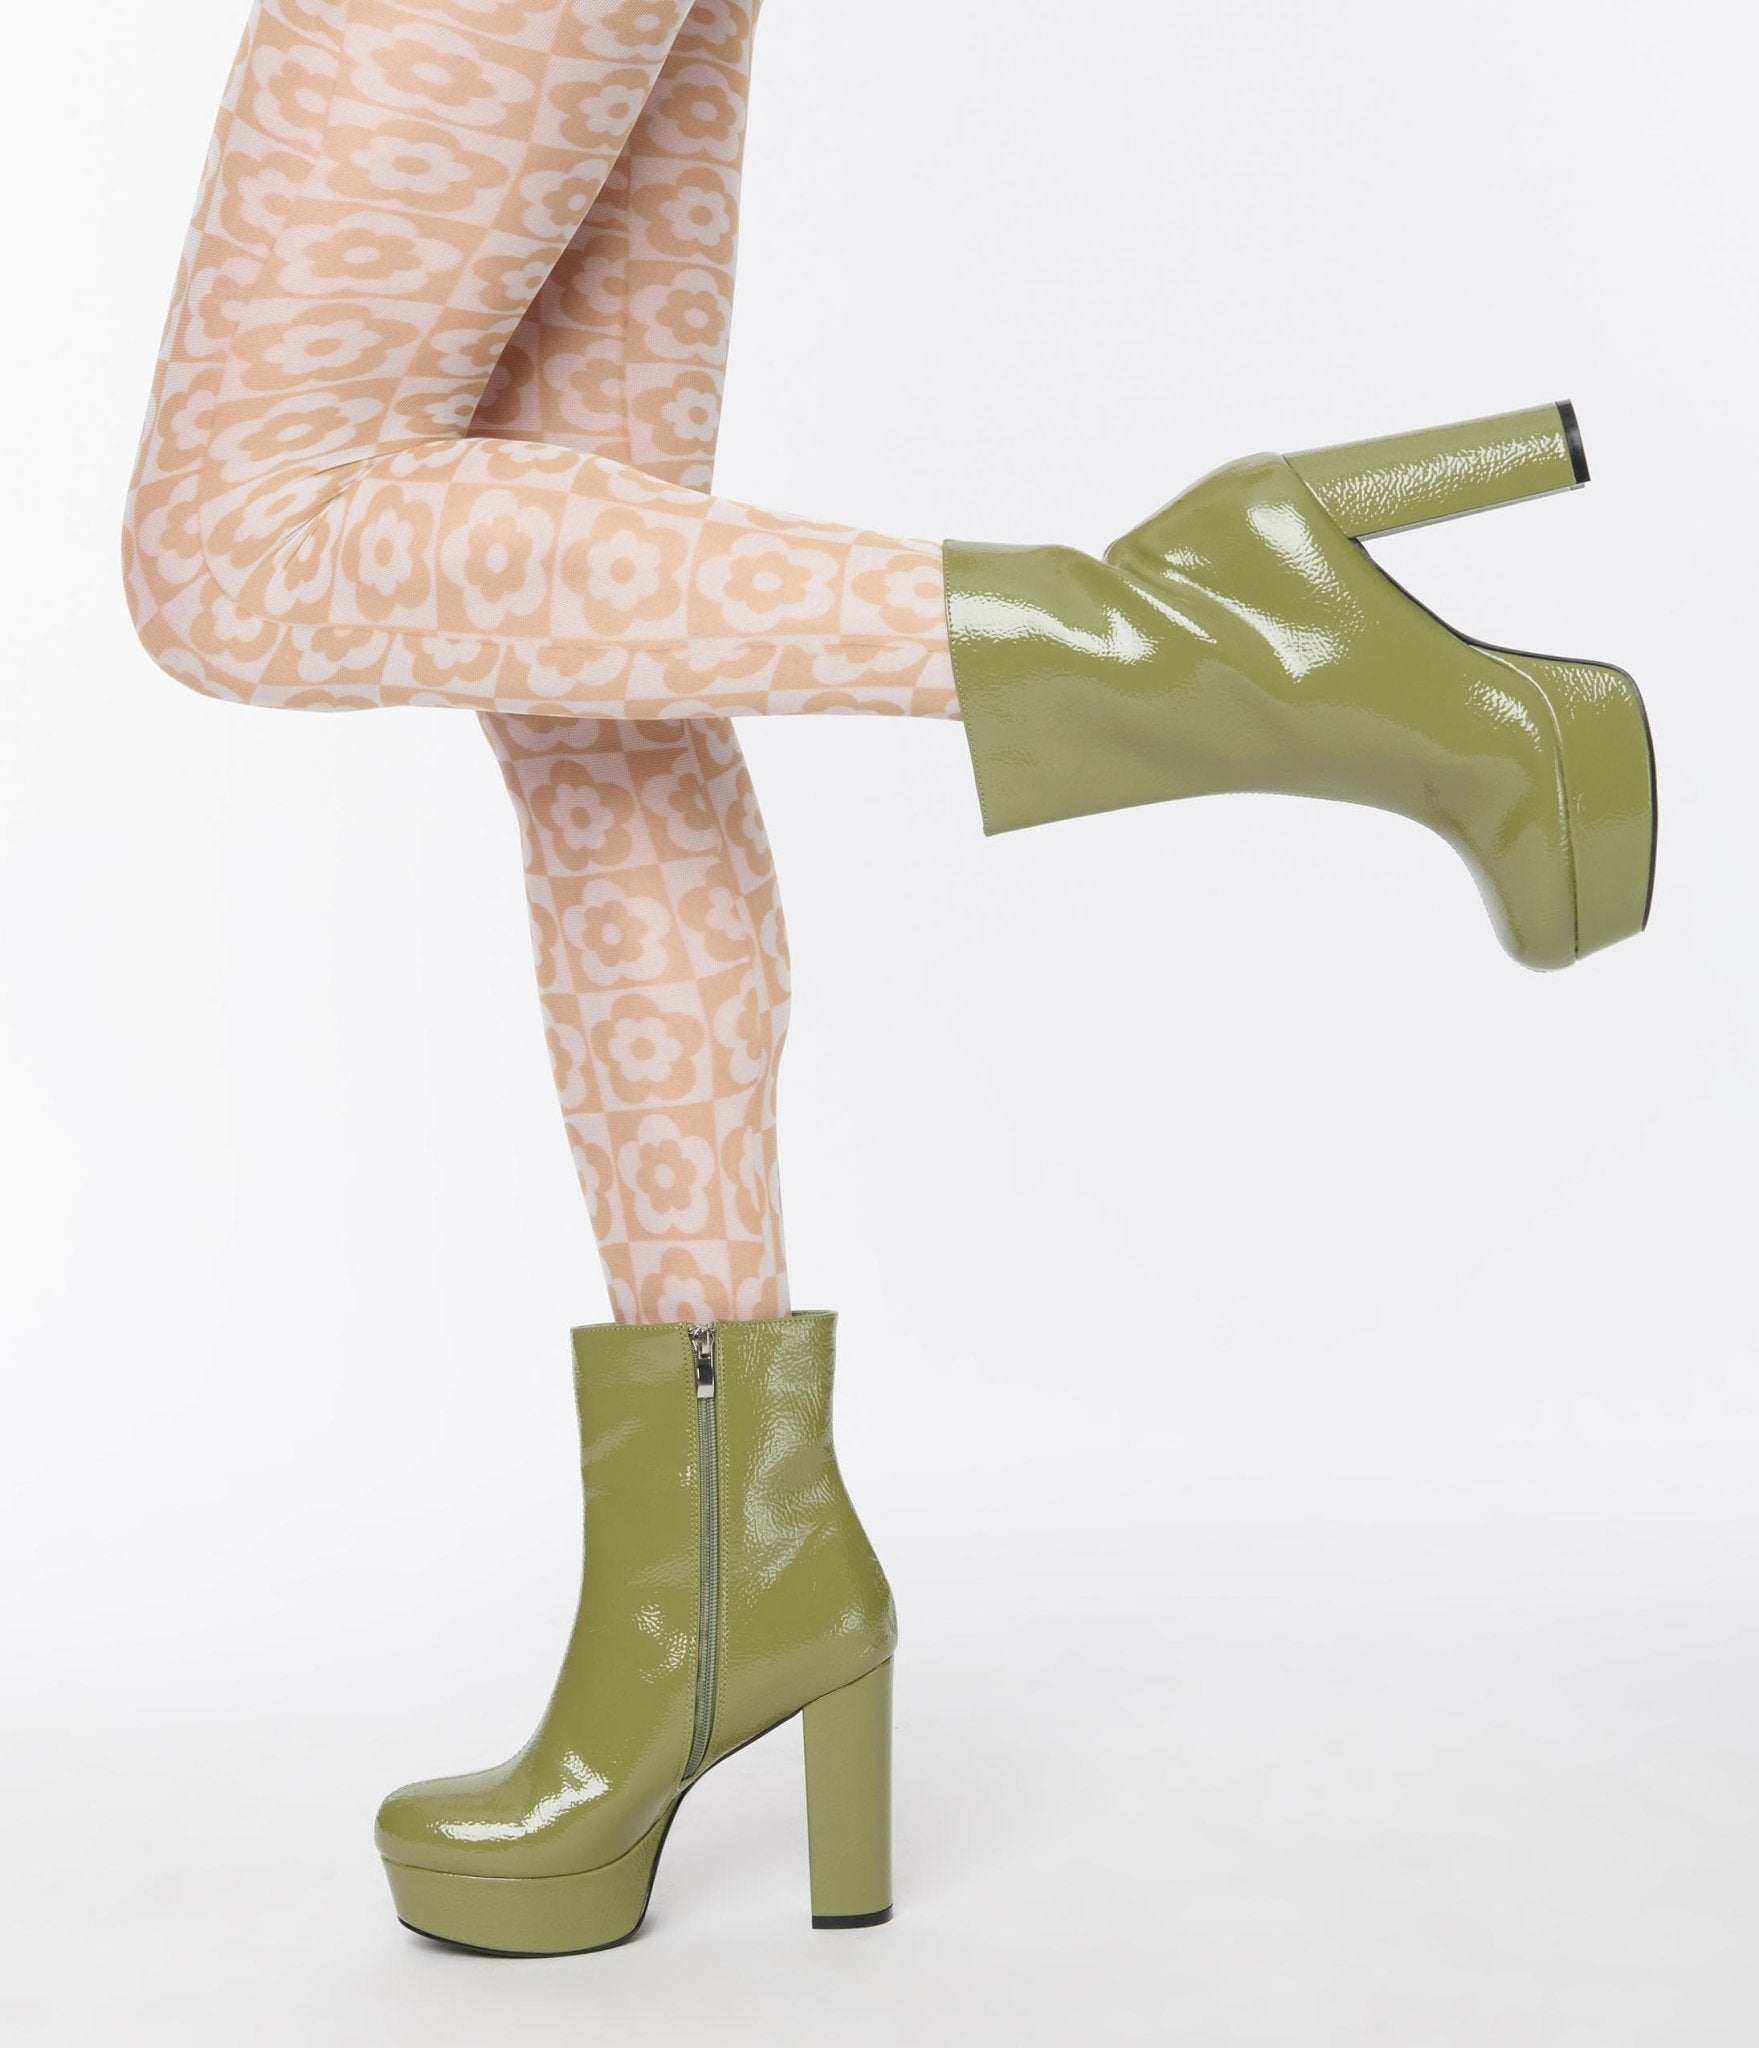 Nude Mod Floral Gingham Tights - Unique Vintage - Womens, ACCESSORIES, HOSIERY